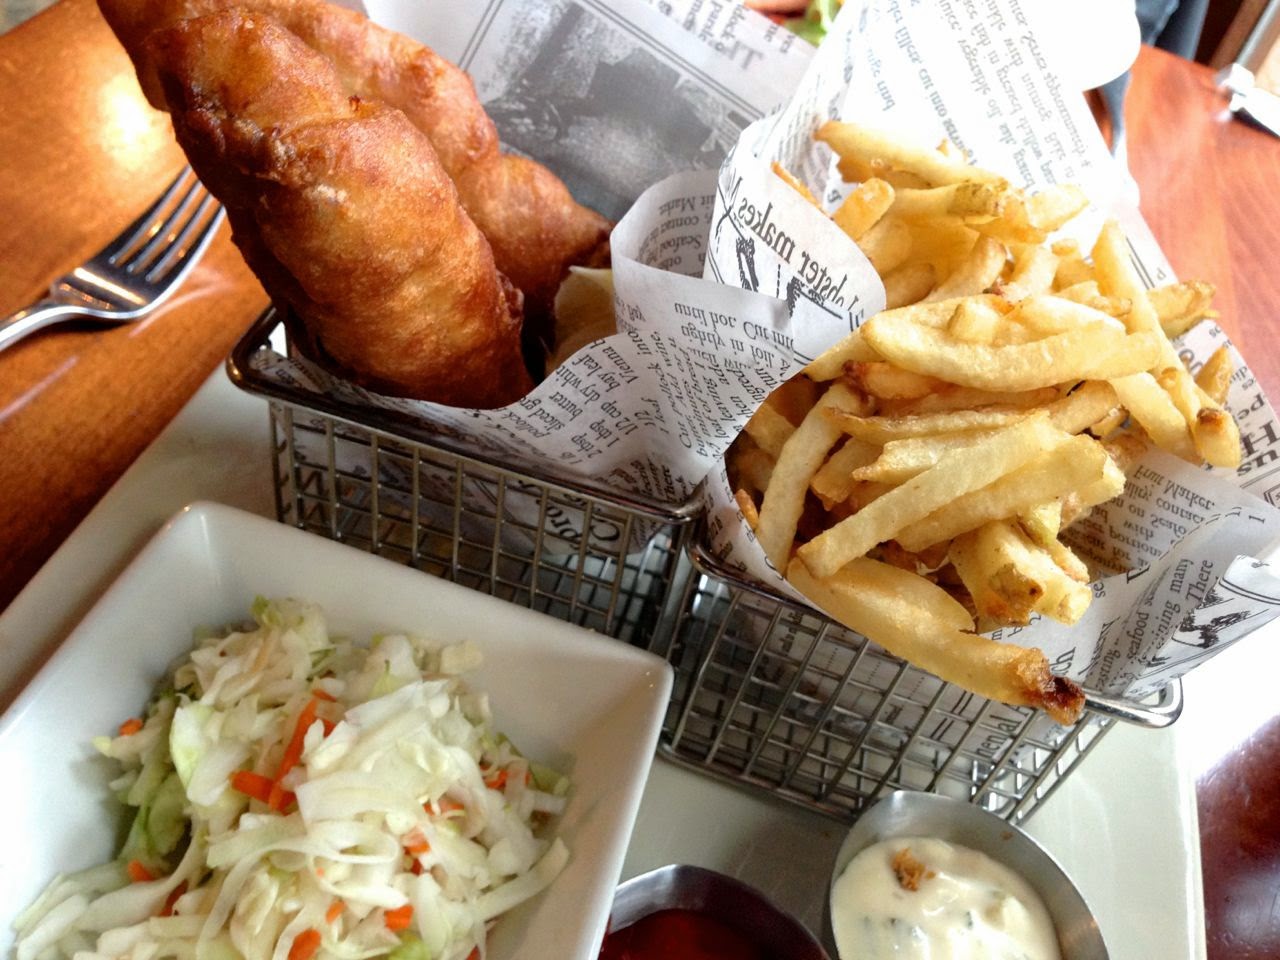 Vancouver Dine out 2015: The Vancouver Fish Company Restaurant Review